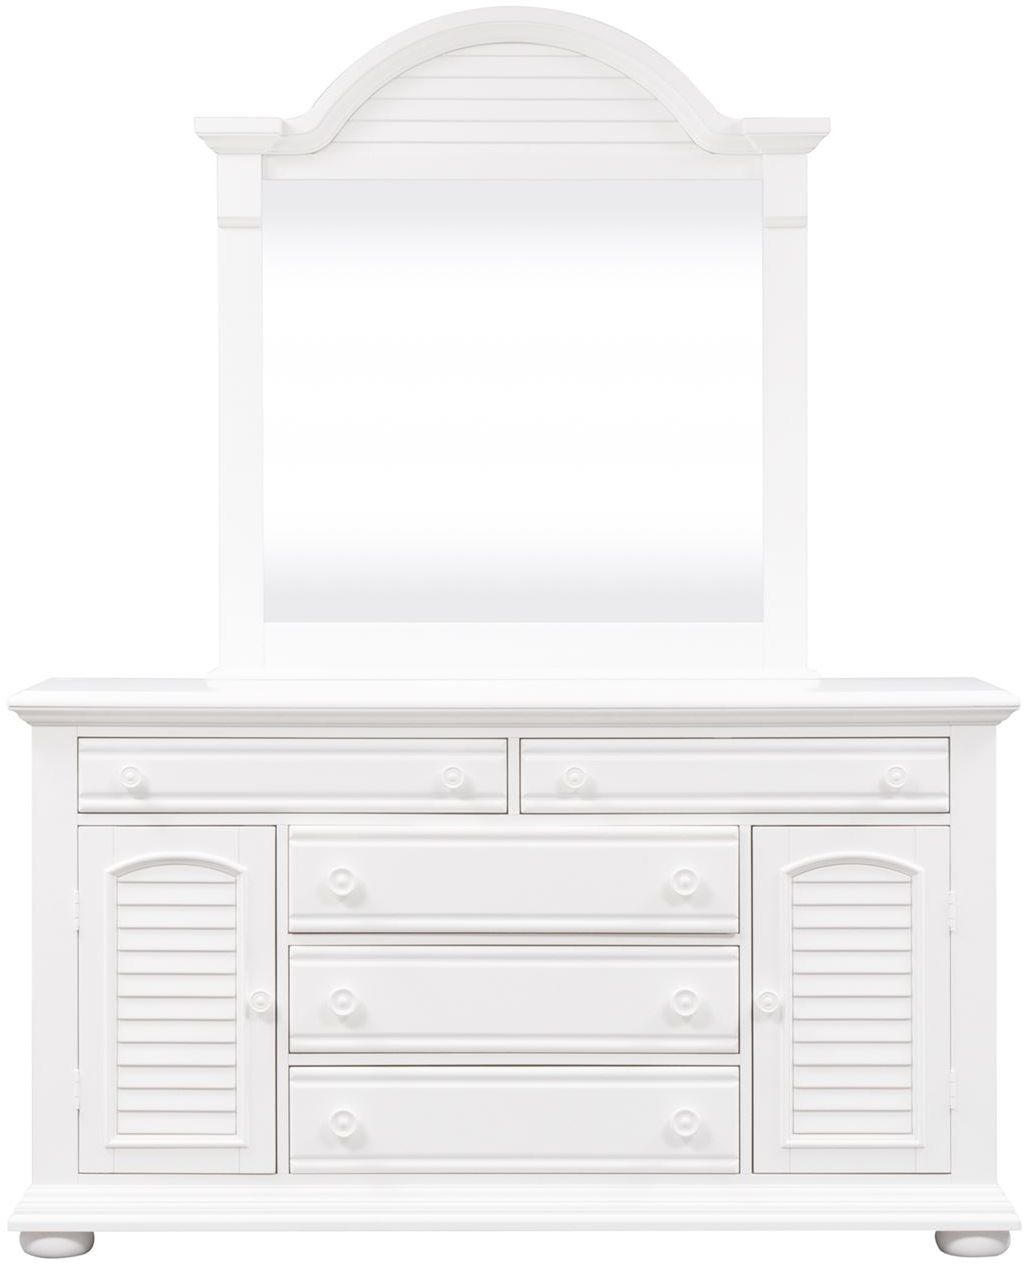 Liberty Furniture Summer House I Oyster White 2 Door 5 Drawer Dresser With Mirror